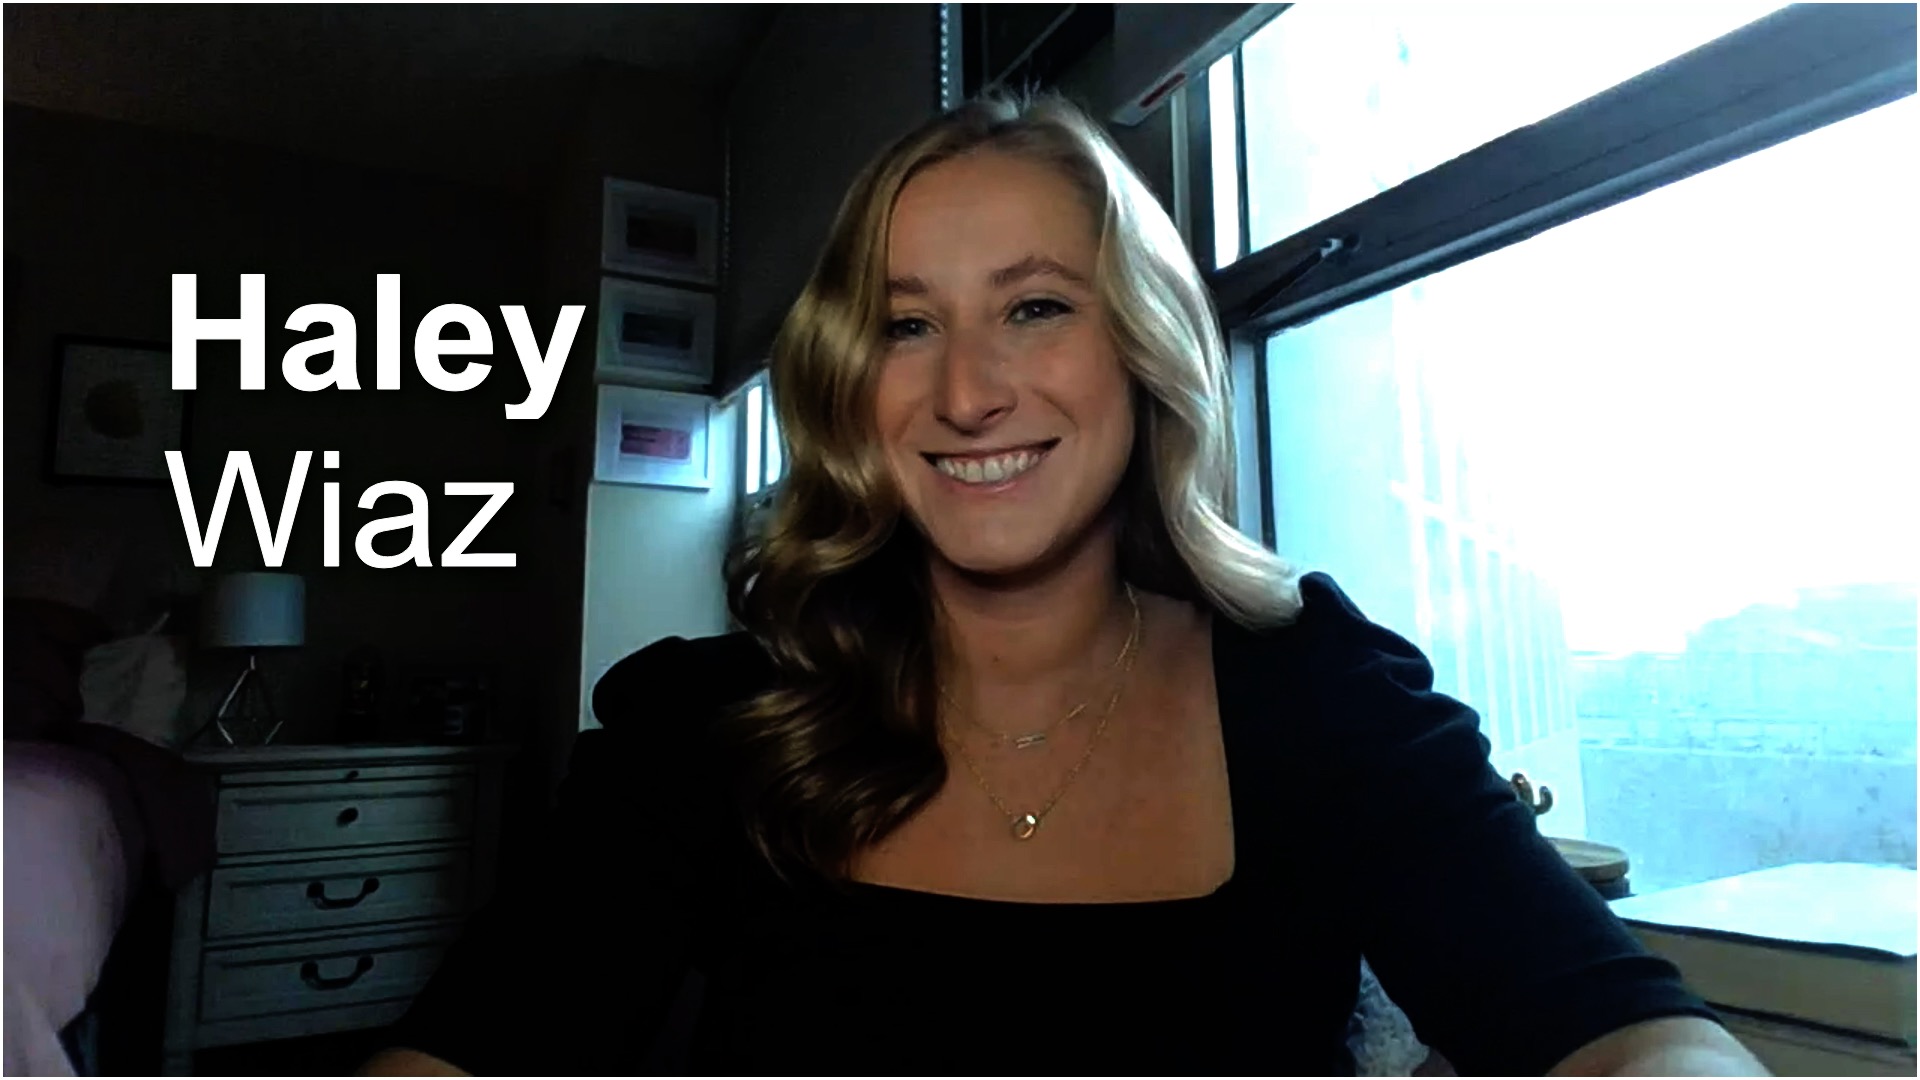 “Marketing and Beyond” with Haley Wiaz from Scale Marketing